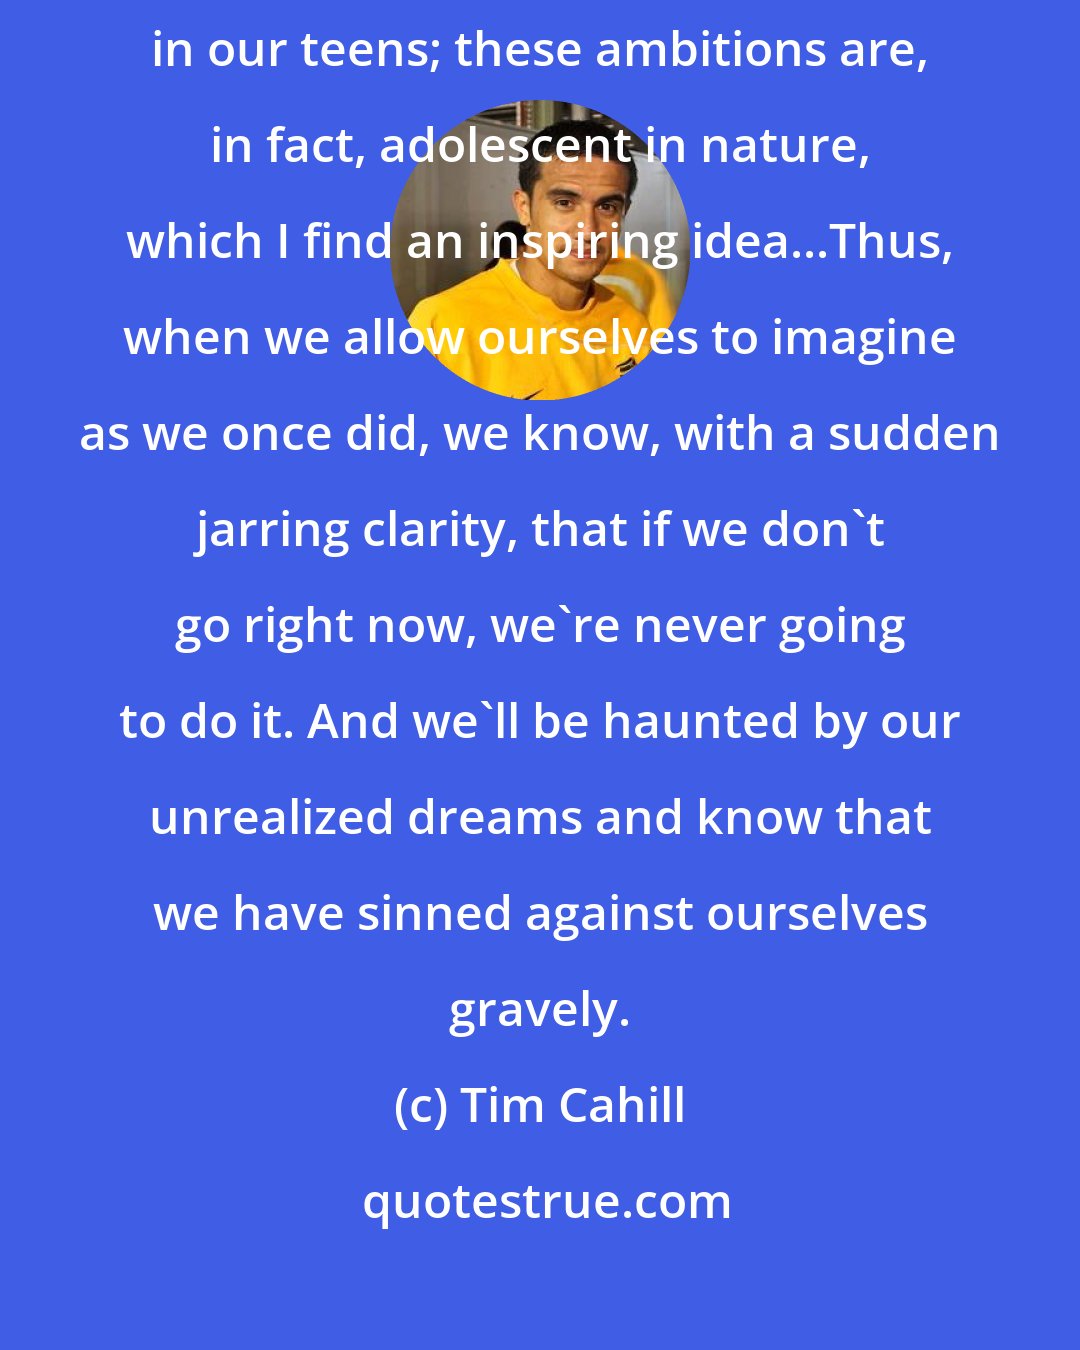 Tim Cahill: A lot of us first aspired to far-ranging travel and exotic adventure early in our teens; these ambitions are, in fact, adolescent in nature, which I find an inspiring idea...Thus, when we allow ourselves to imagine as we once did, we know, with a sudden jarring clarity, that if we don't go right now, we're never going to do it. And we'll be haunted by our unrealized dreams and know that we have sinned against ourselves gravely.